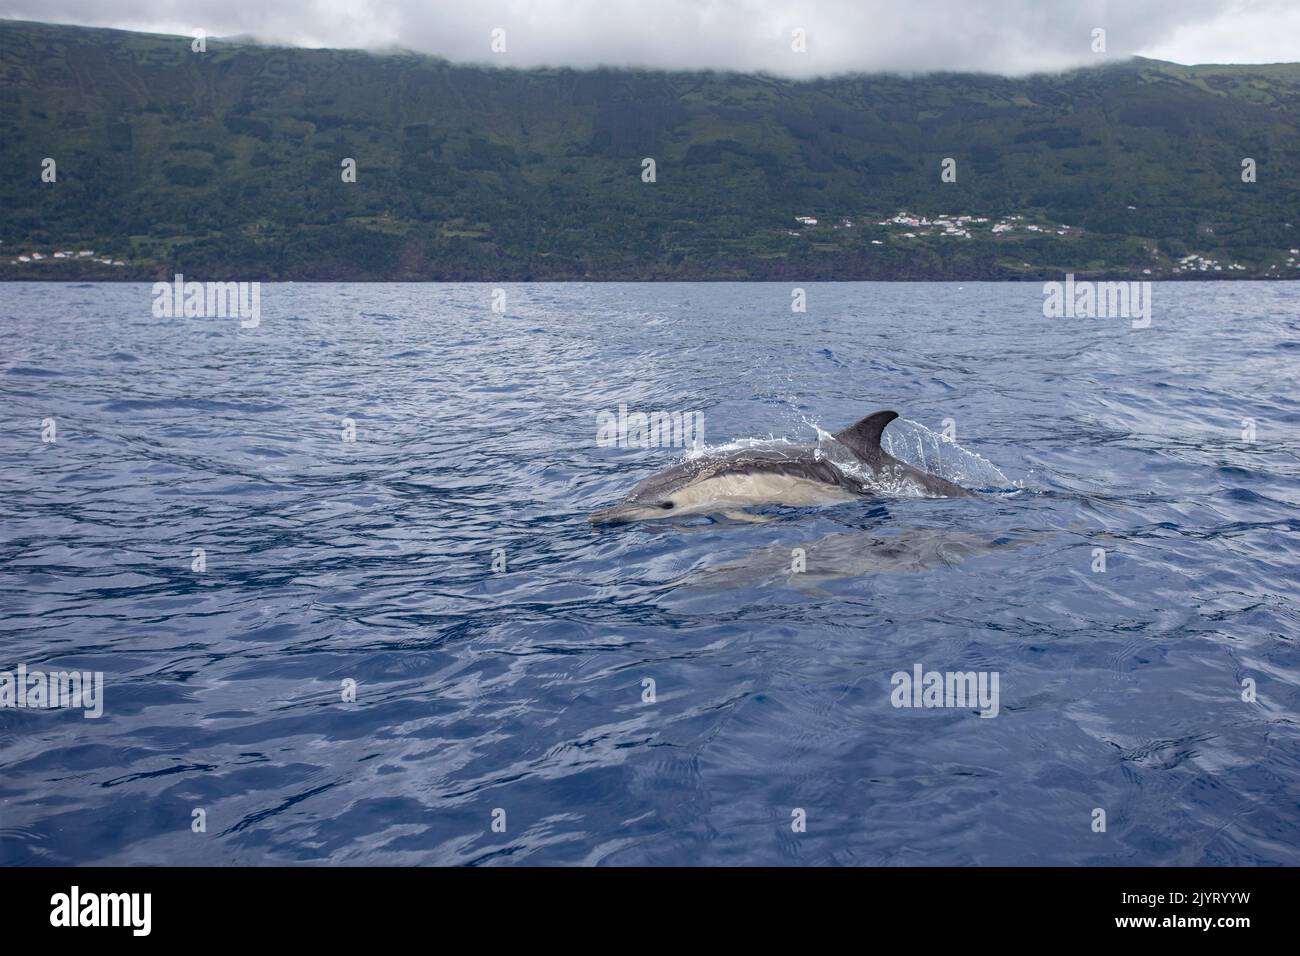 Common dolphin surfacing (Delphinus delphis) jumping over the waves. They are the most abundant cetacean in the world, with a global population of about six million, Horta island (Faial), Azores, Portugal, Atlantic ocean Stock Photo